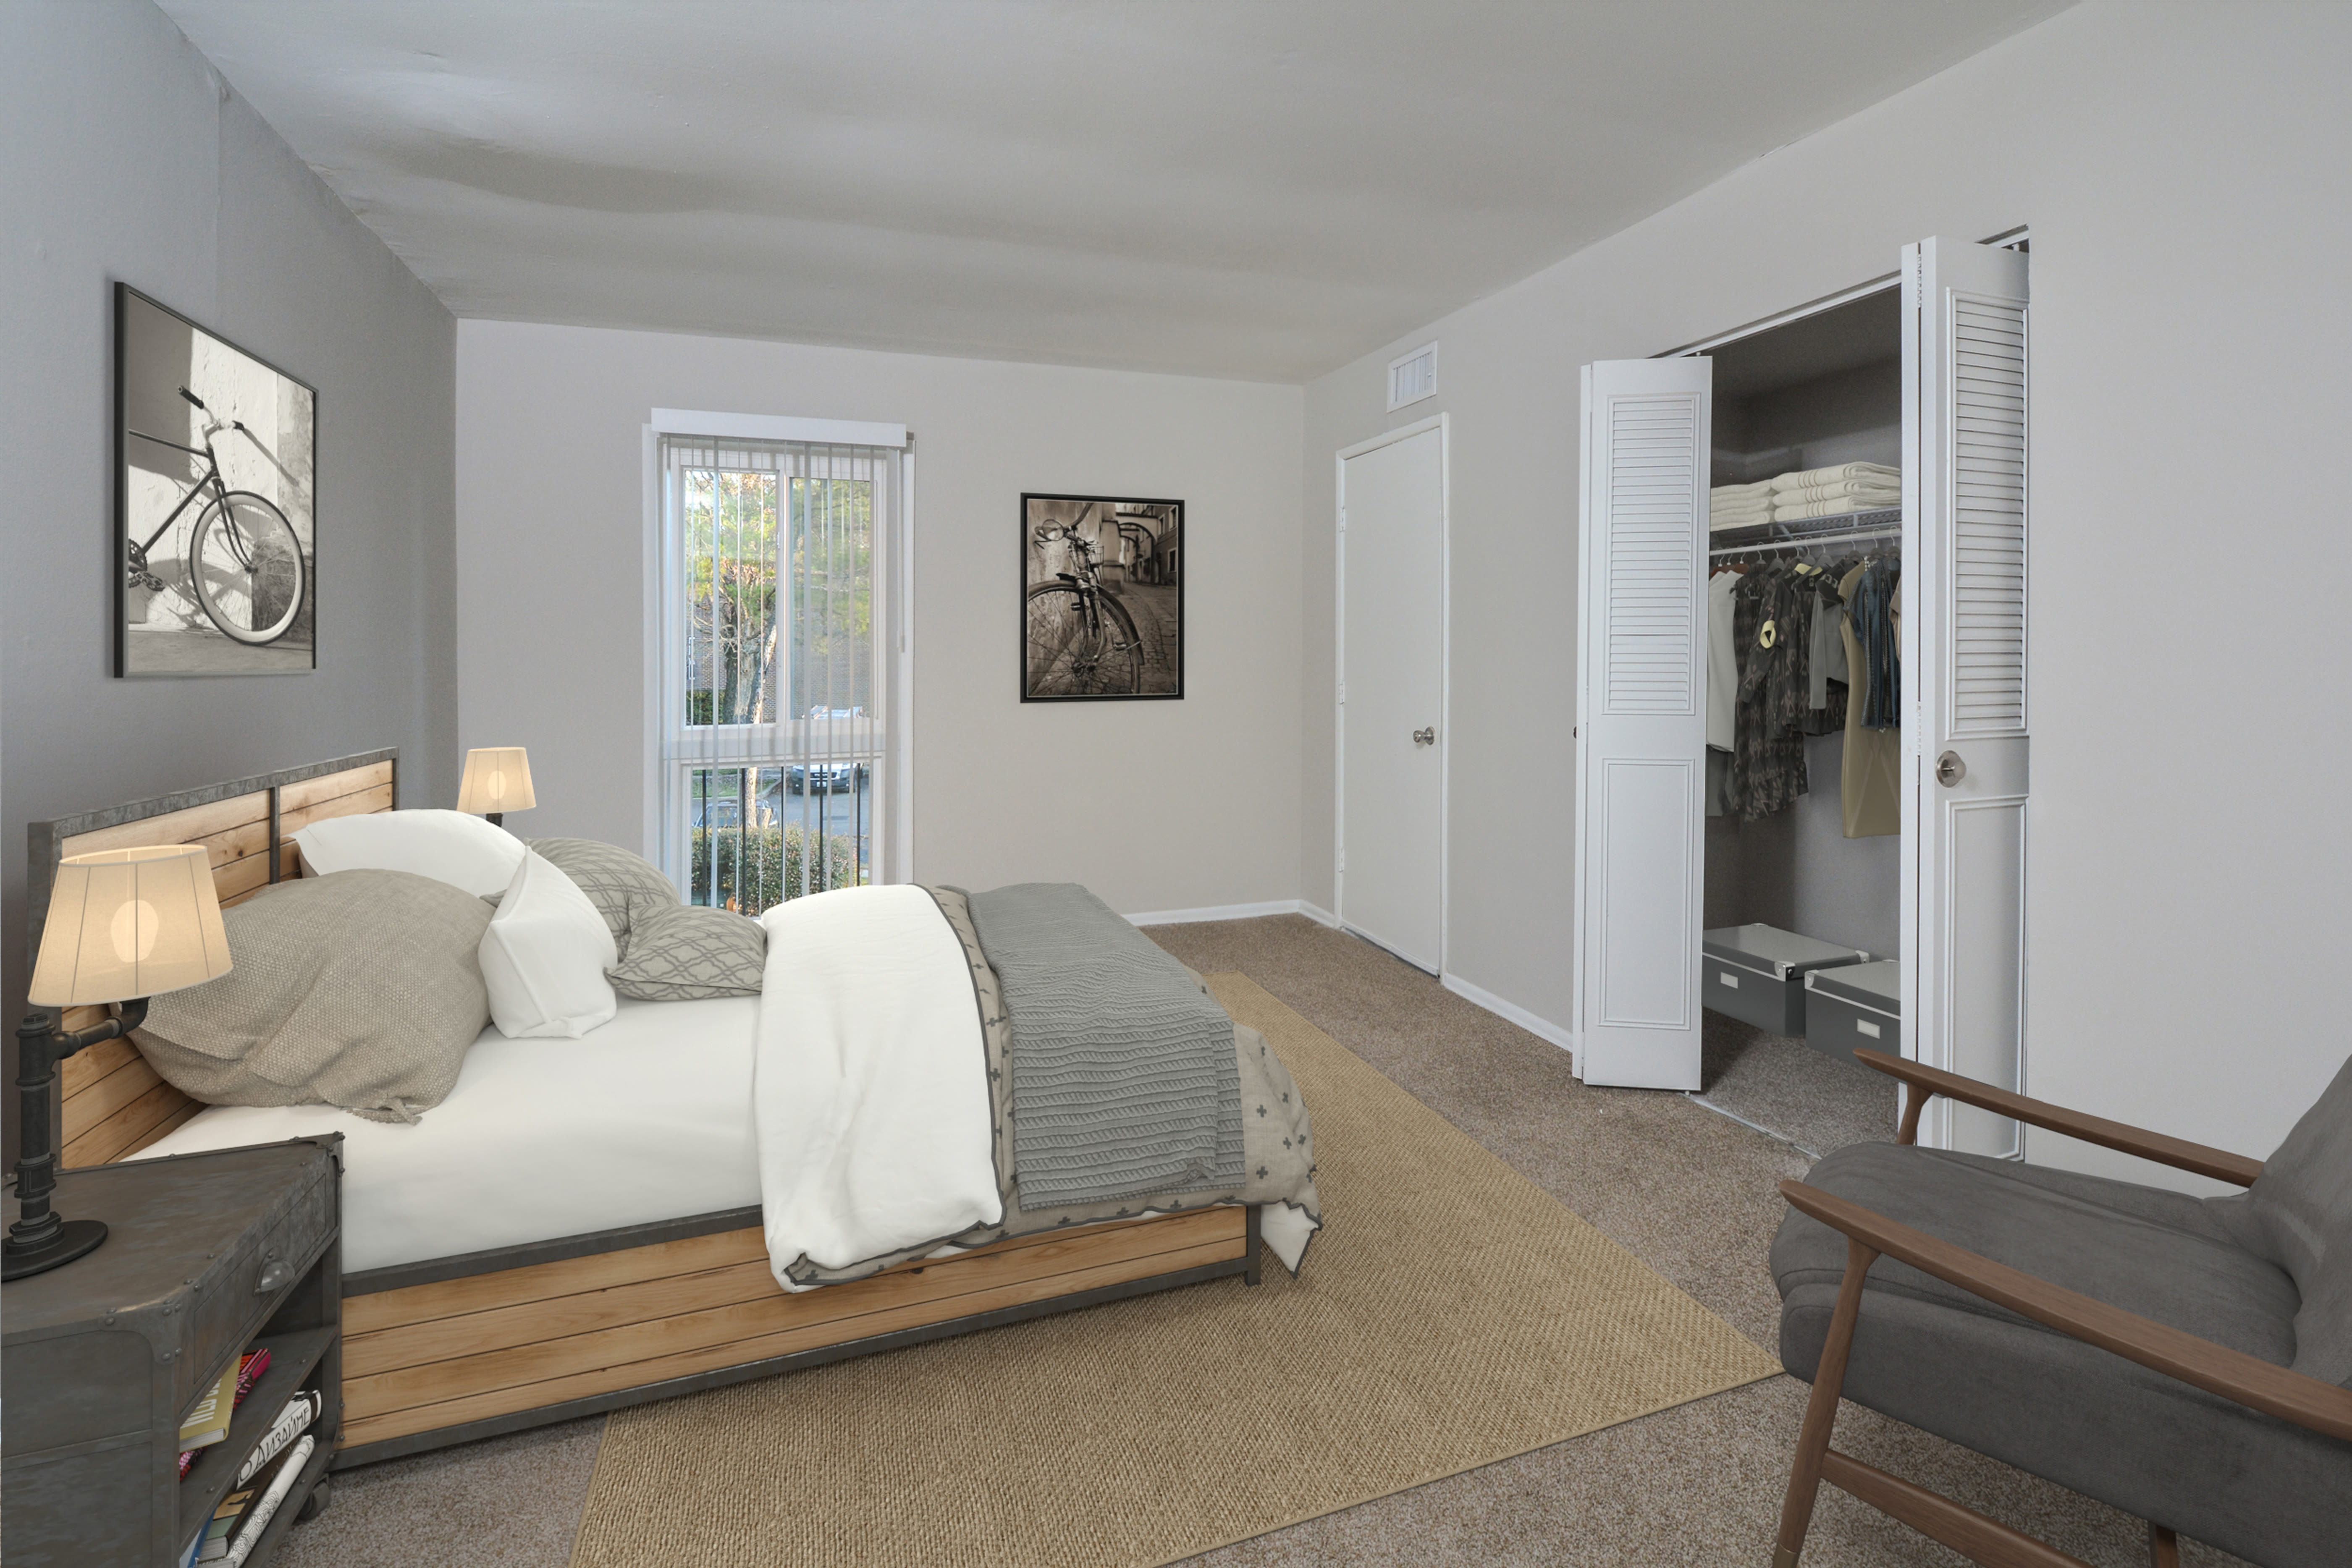 View Floor Plans at Metro Pointe, Baltimore, Maryland